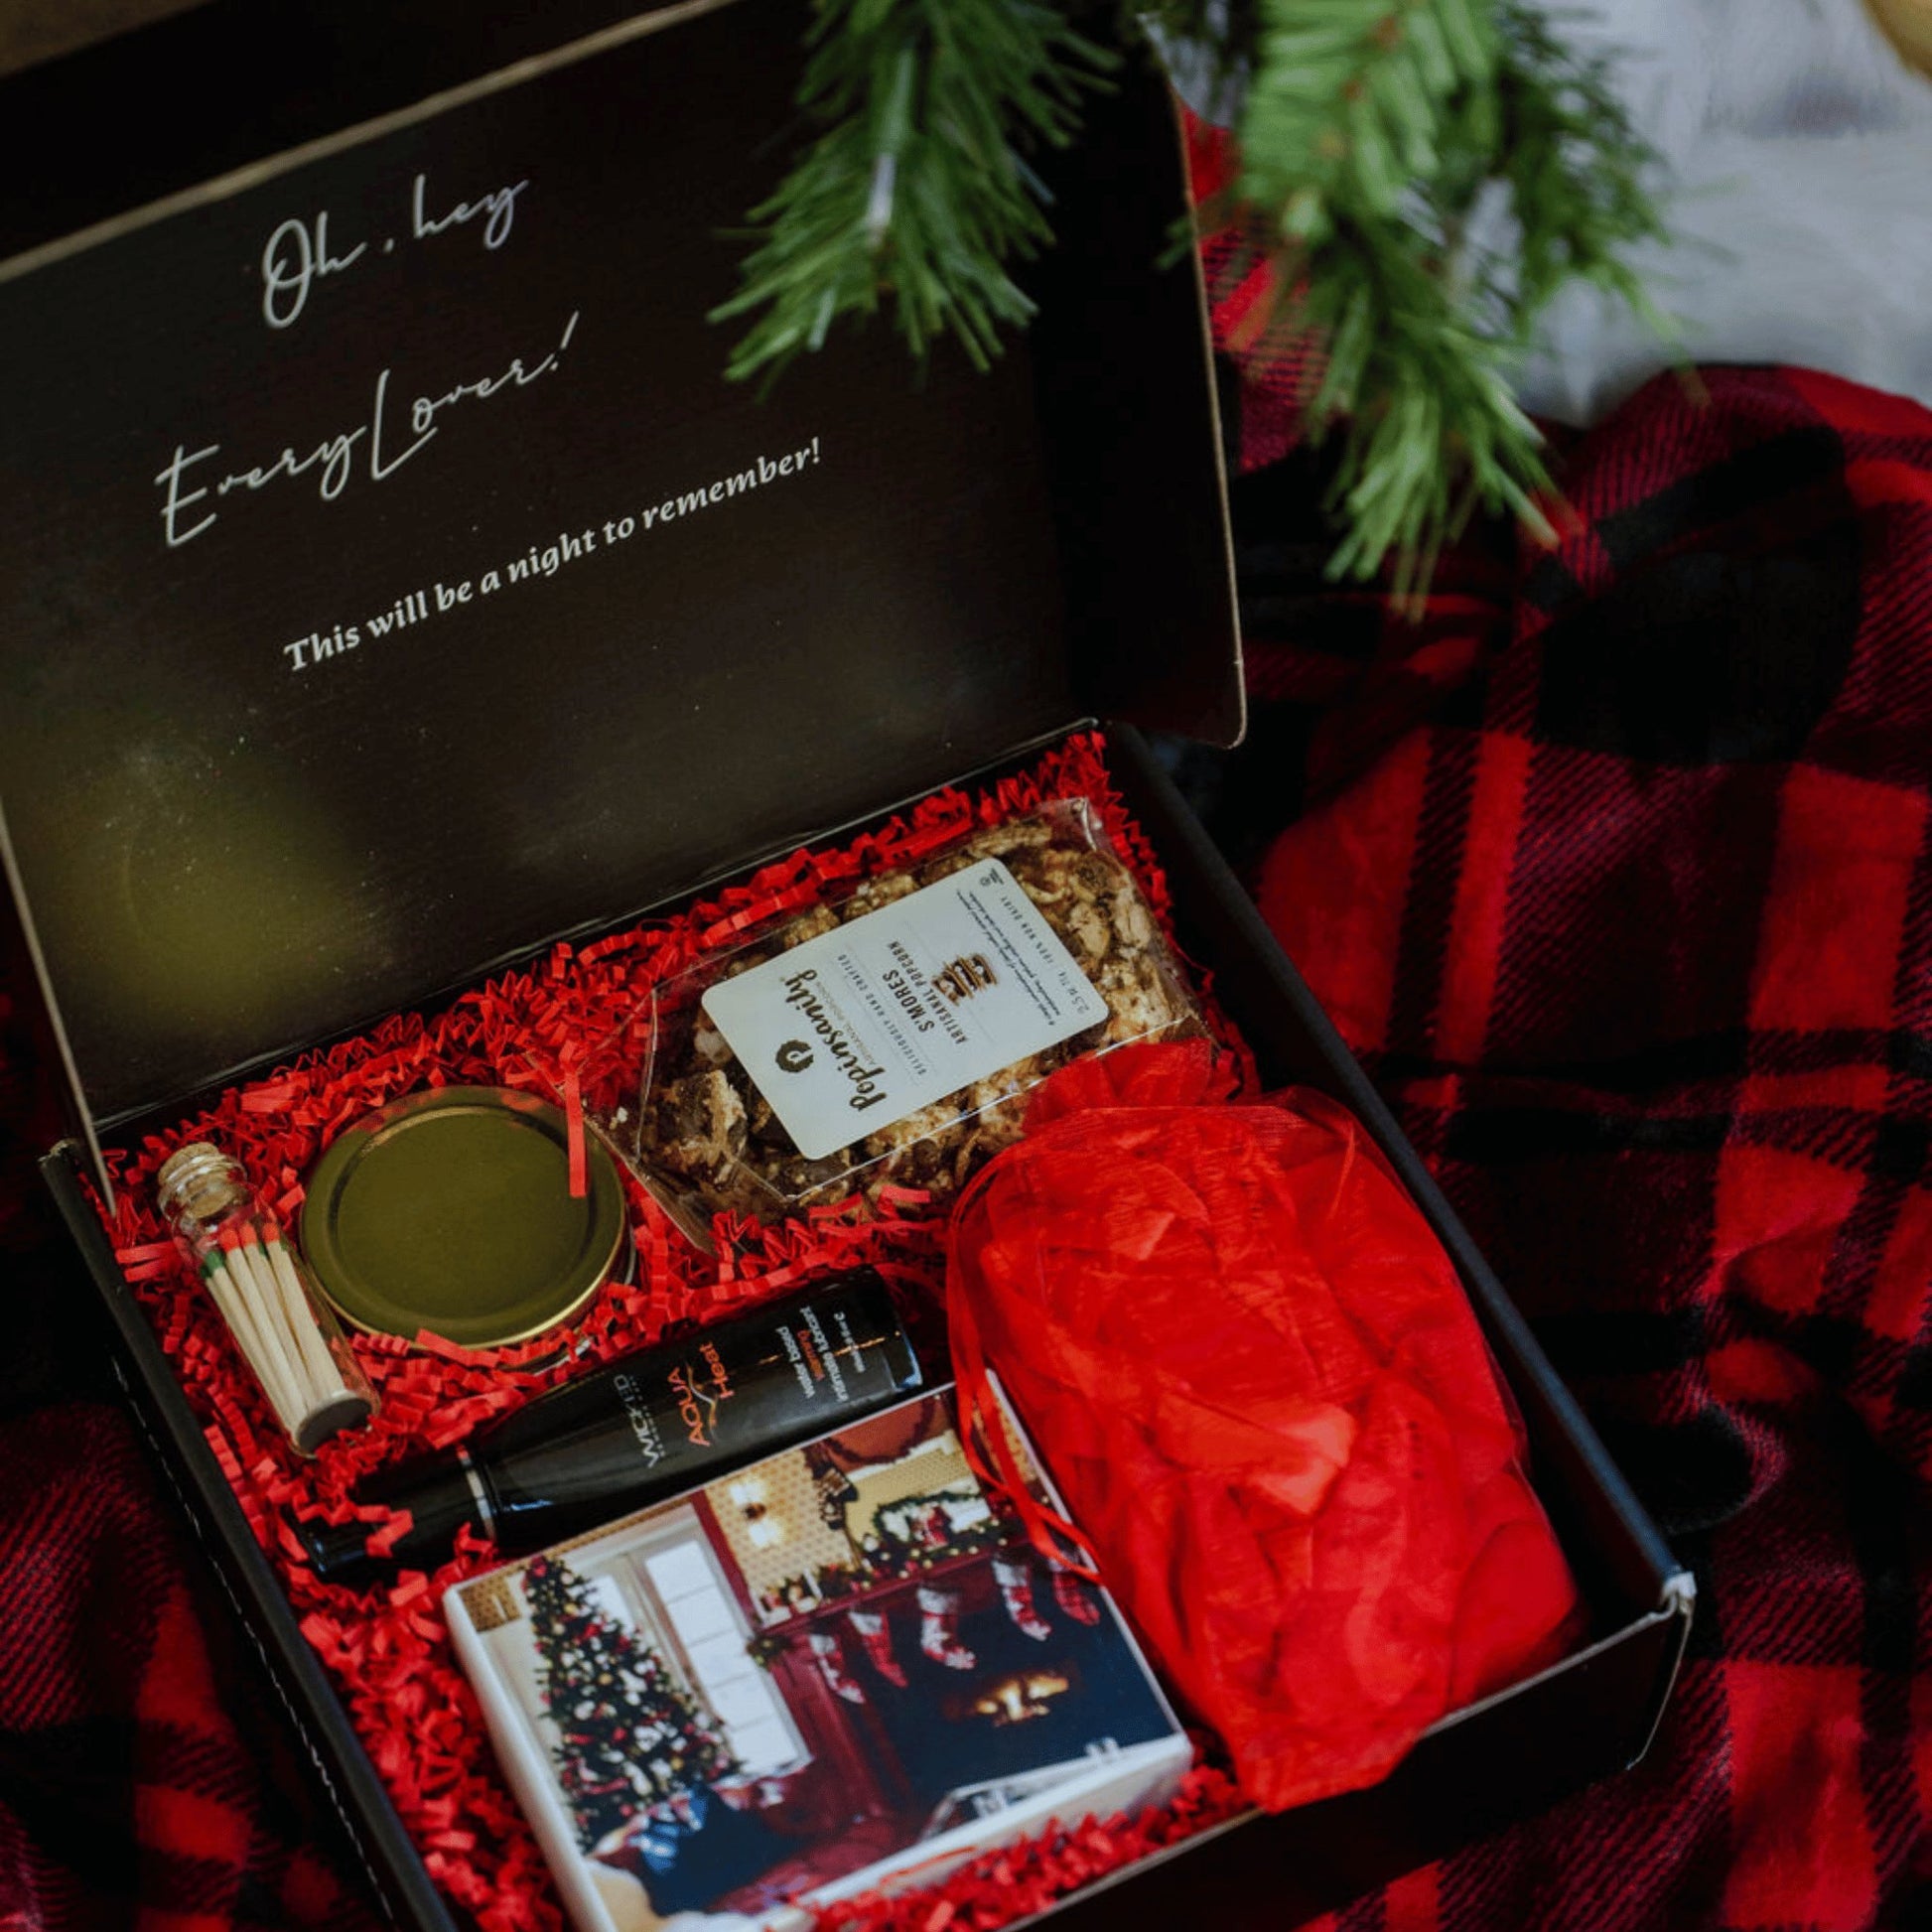 The Intimate Experience Date Night Box Subscription - EveryLoveIntimates